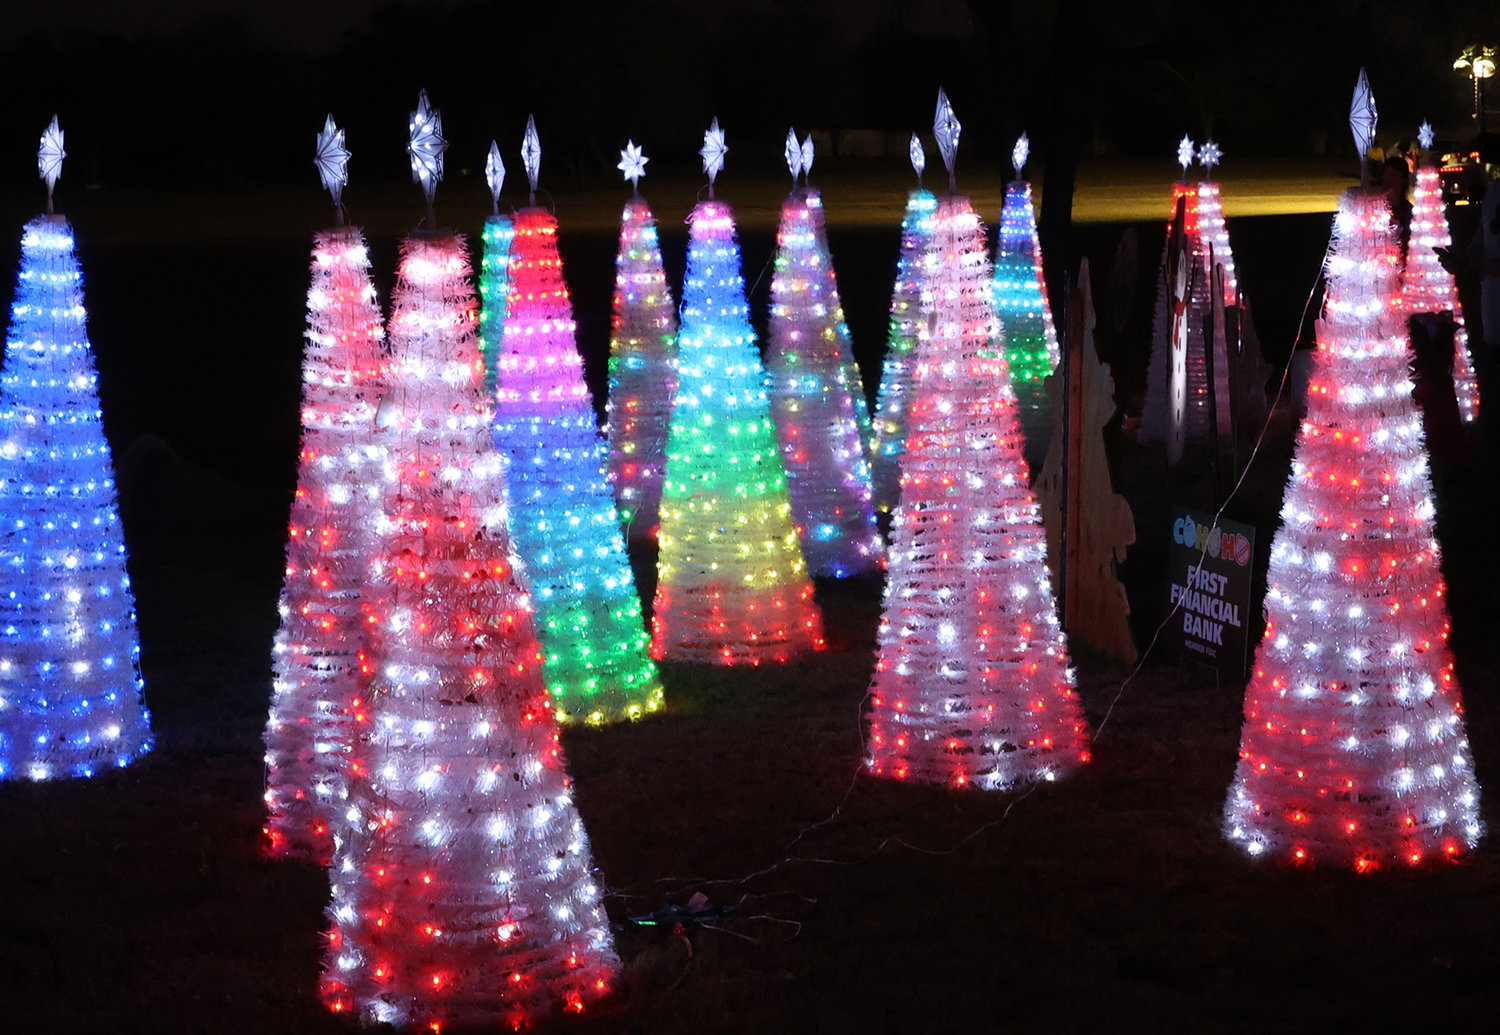 Lights adorned the park and will be on display throughout the season.